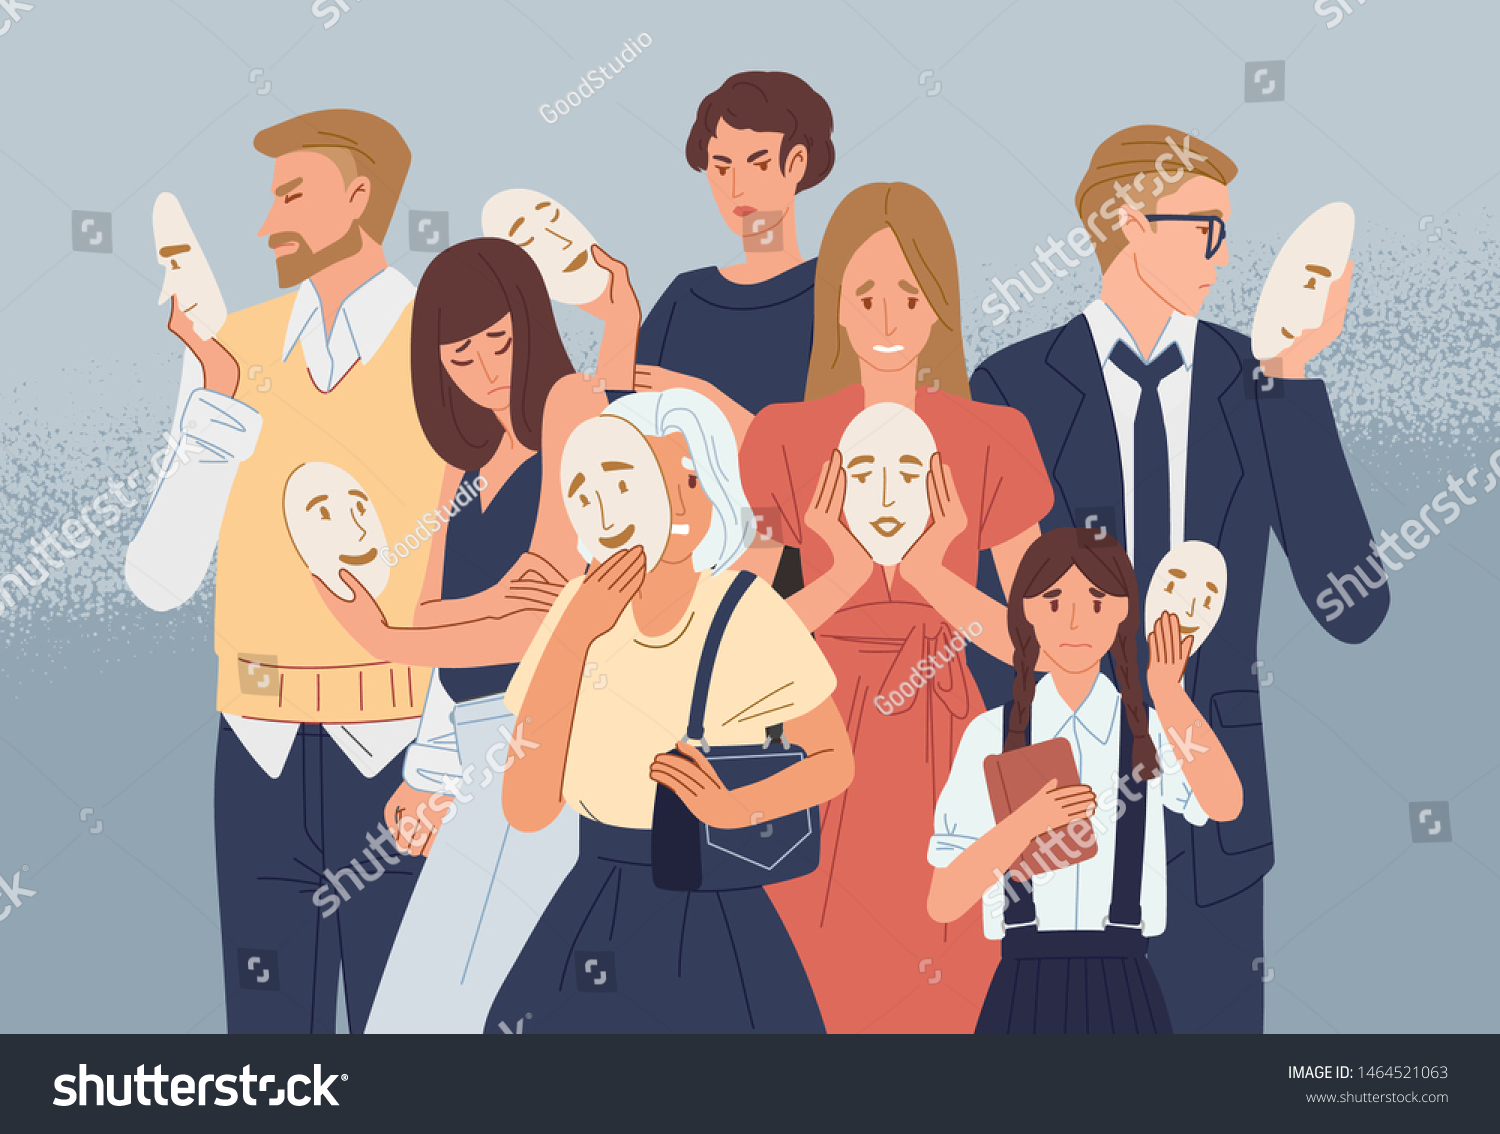 stock-vector-group-of-people-covering-their-faces-with-masks-expressing-positive-emotions-concept-of-hiding-1464521063